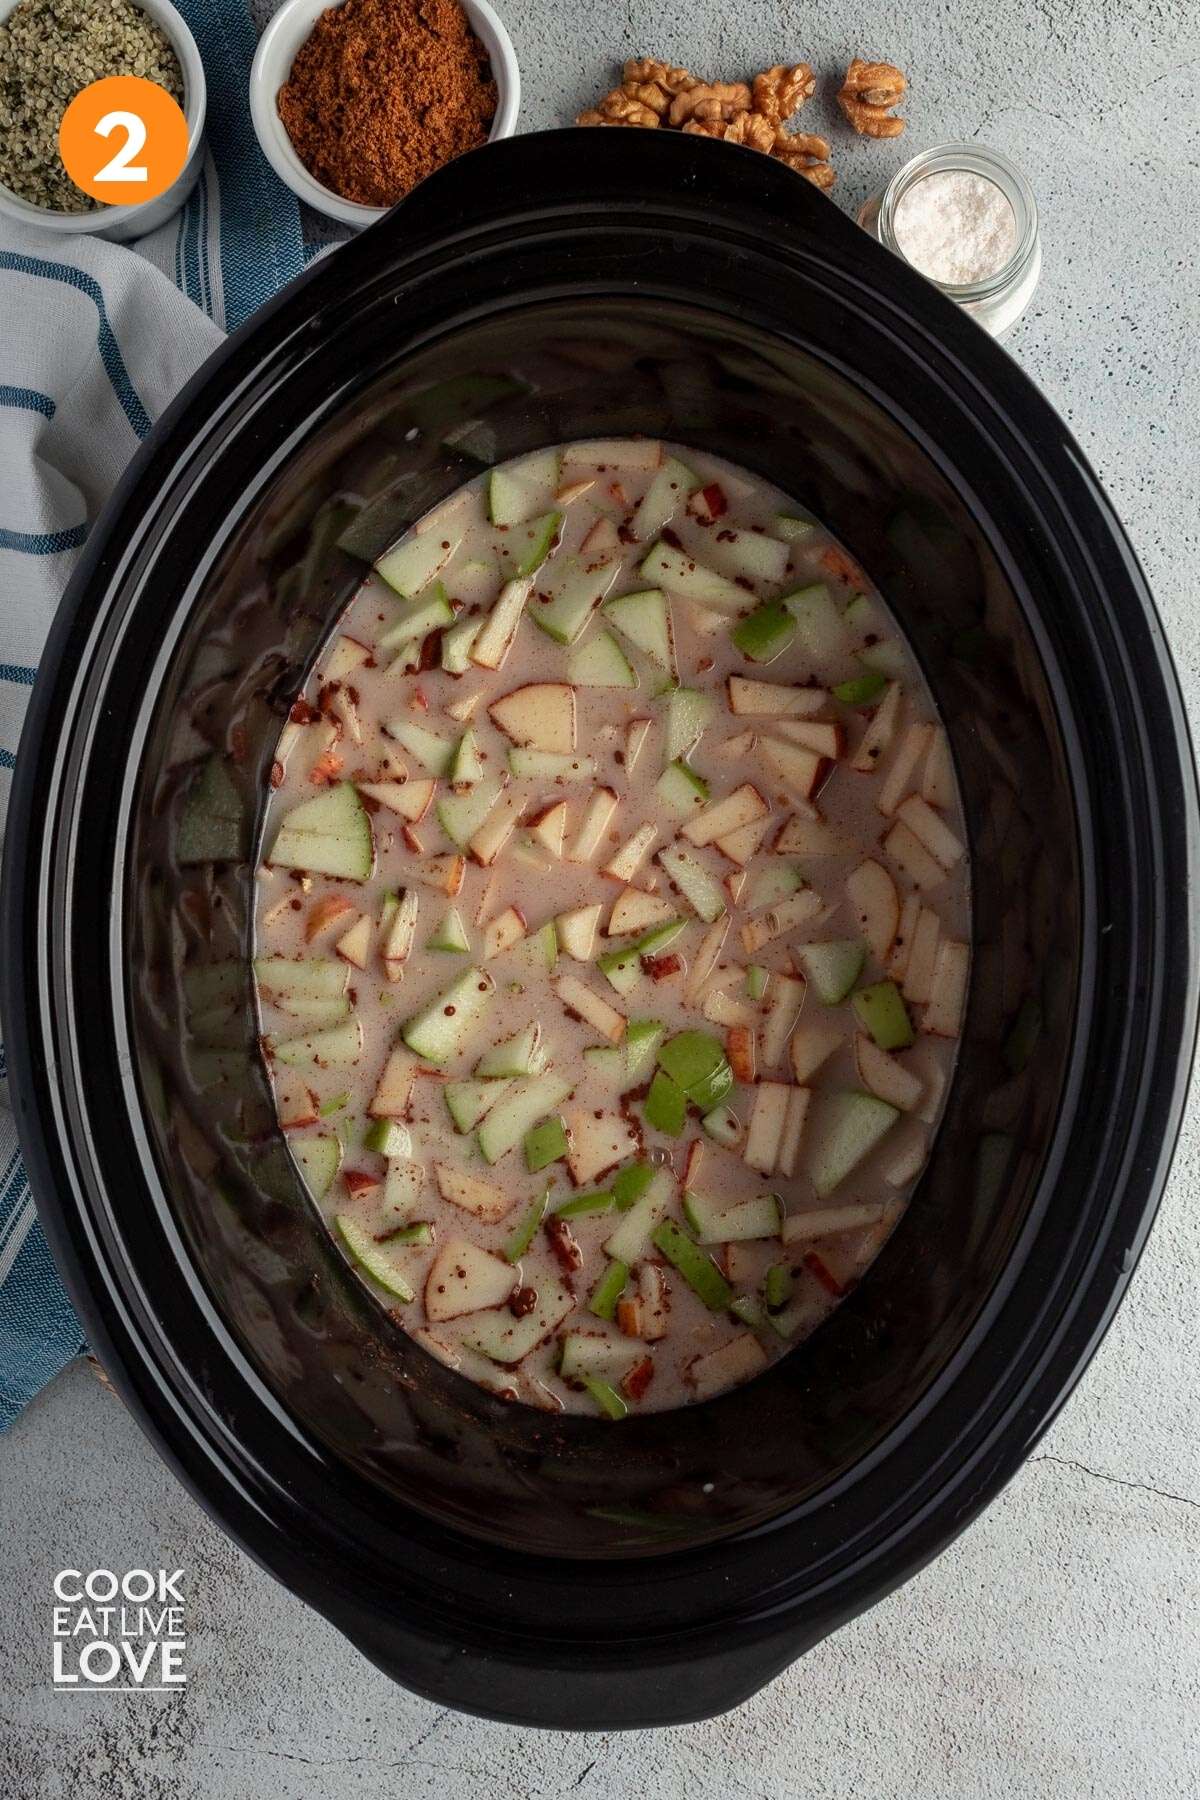 Everything mixed up and ready to cook apple oatmeal in the slow cooker.